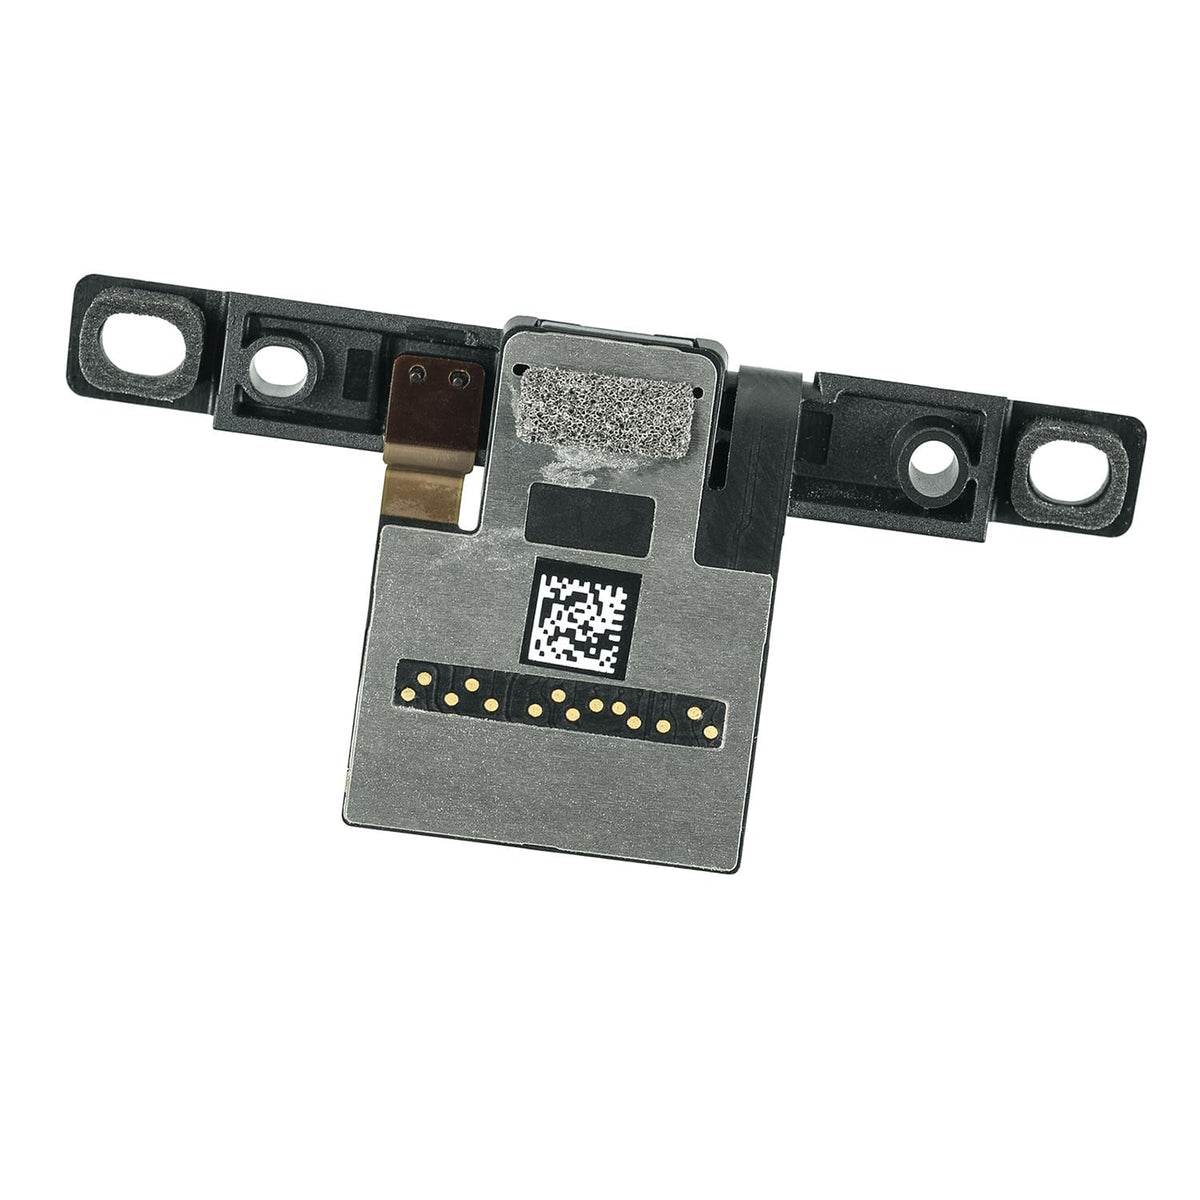 FACE TIME CAMERA  FOR IMAC 27" A1419 (LATE 2015)